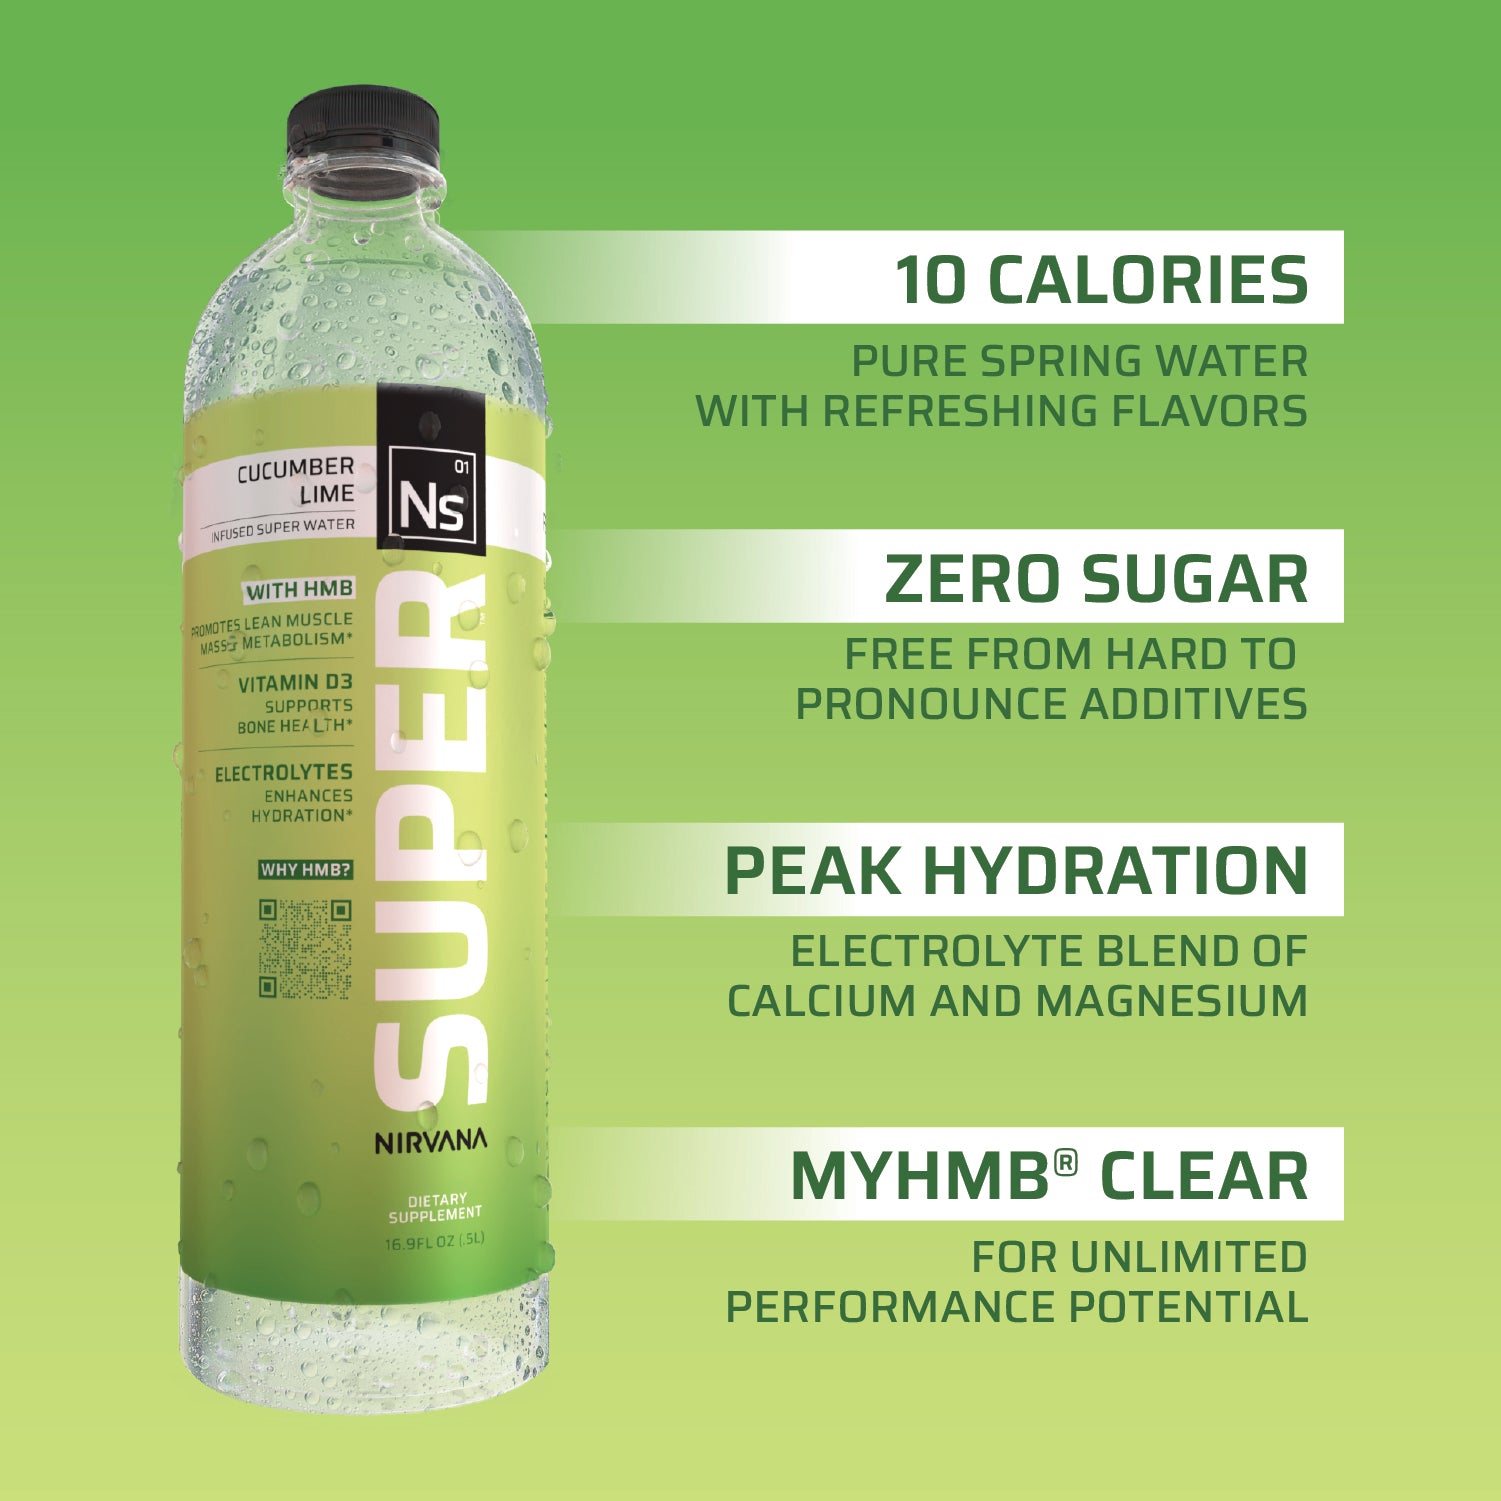 cucumber lime hard seltzer water information summary